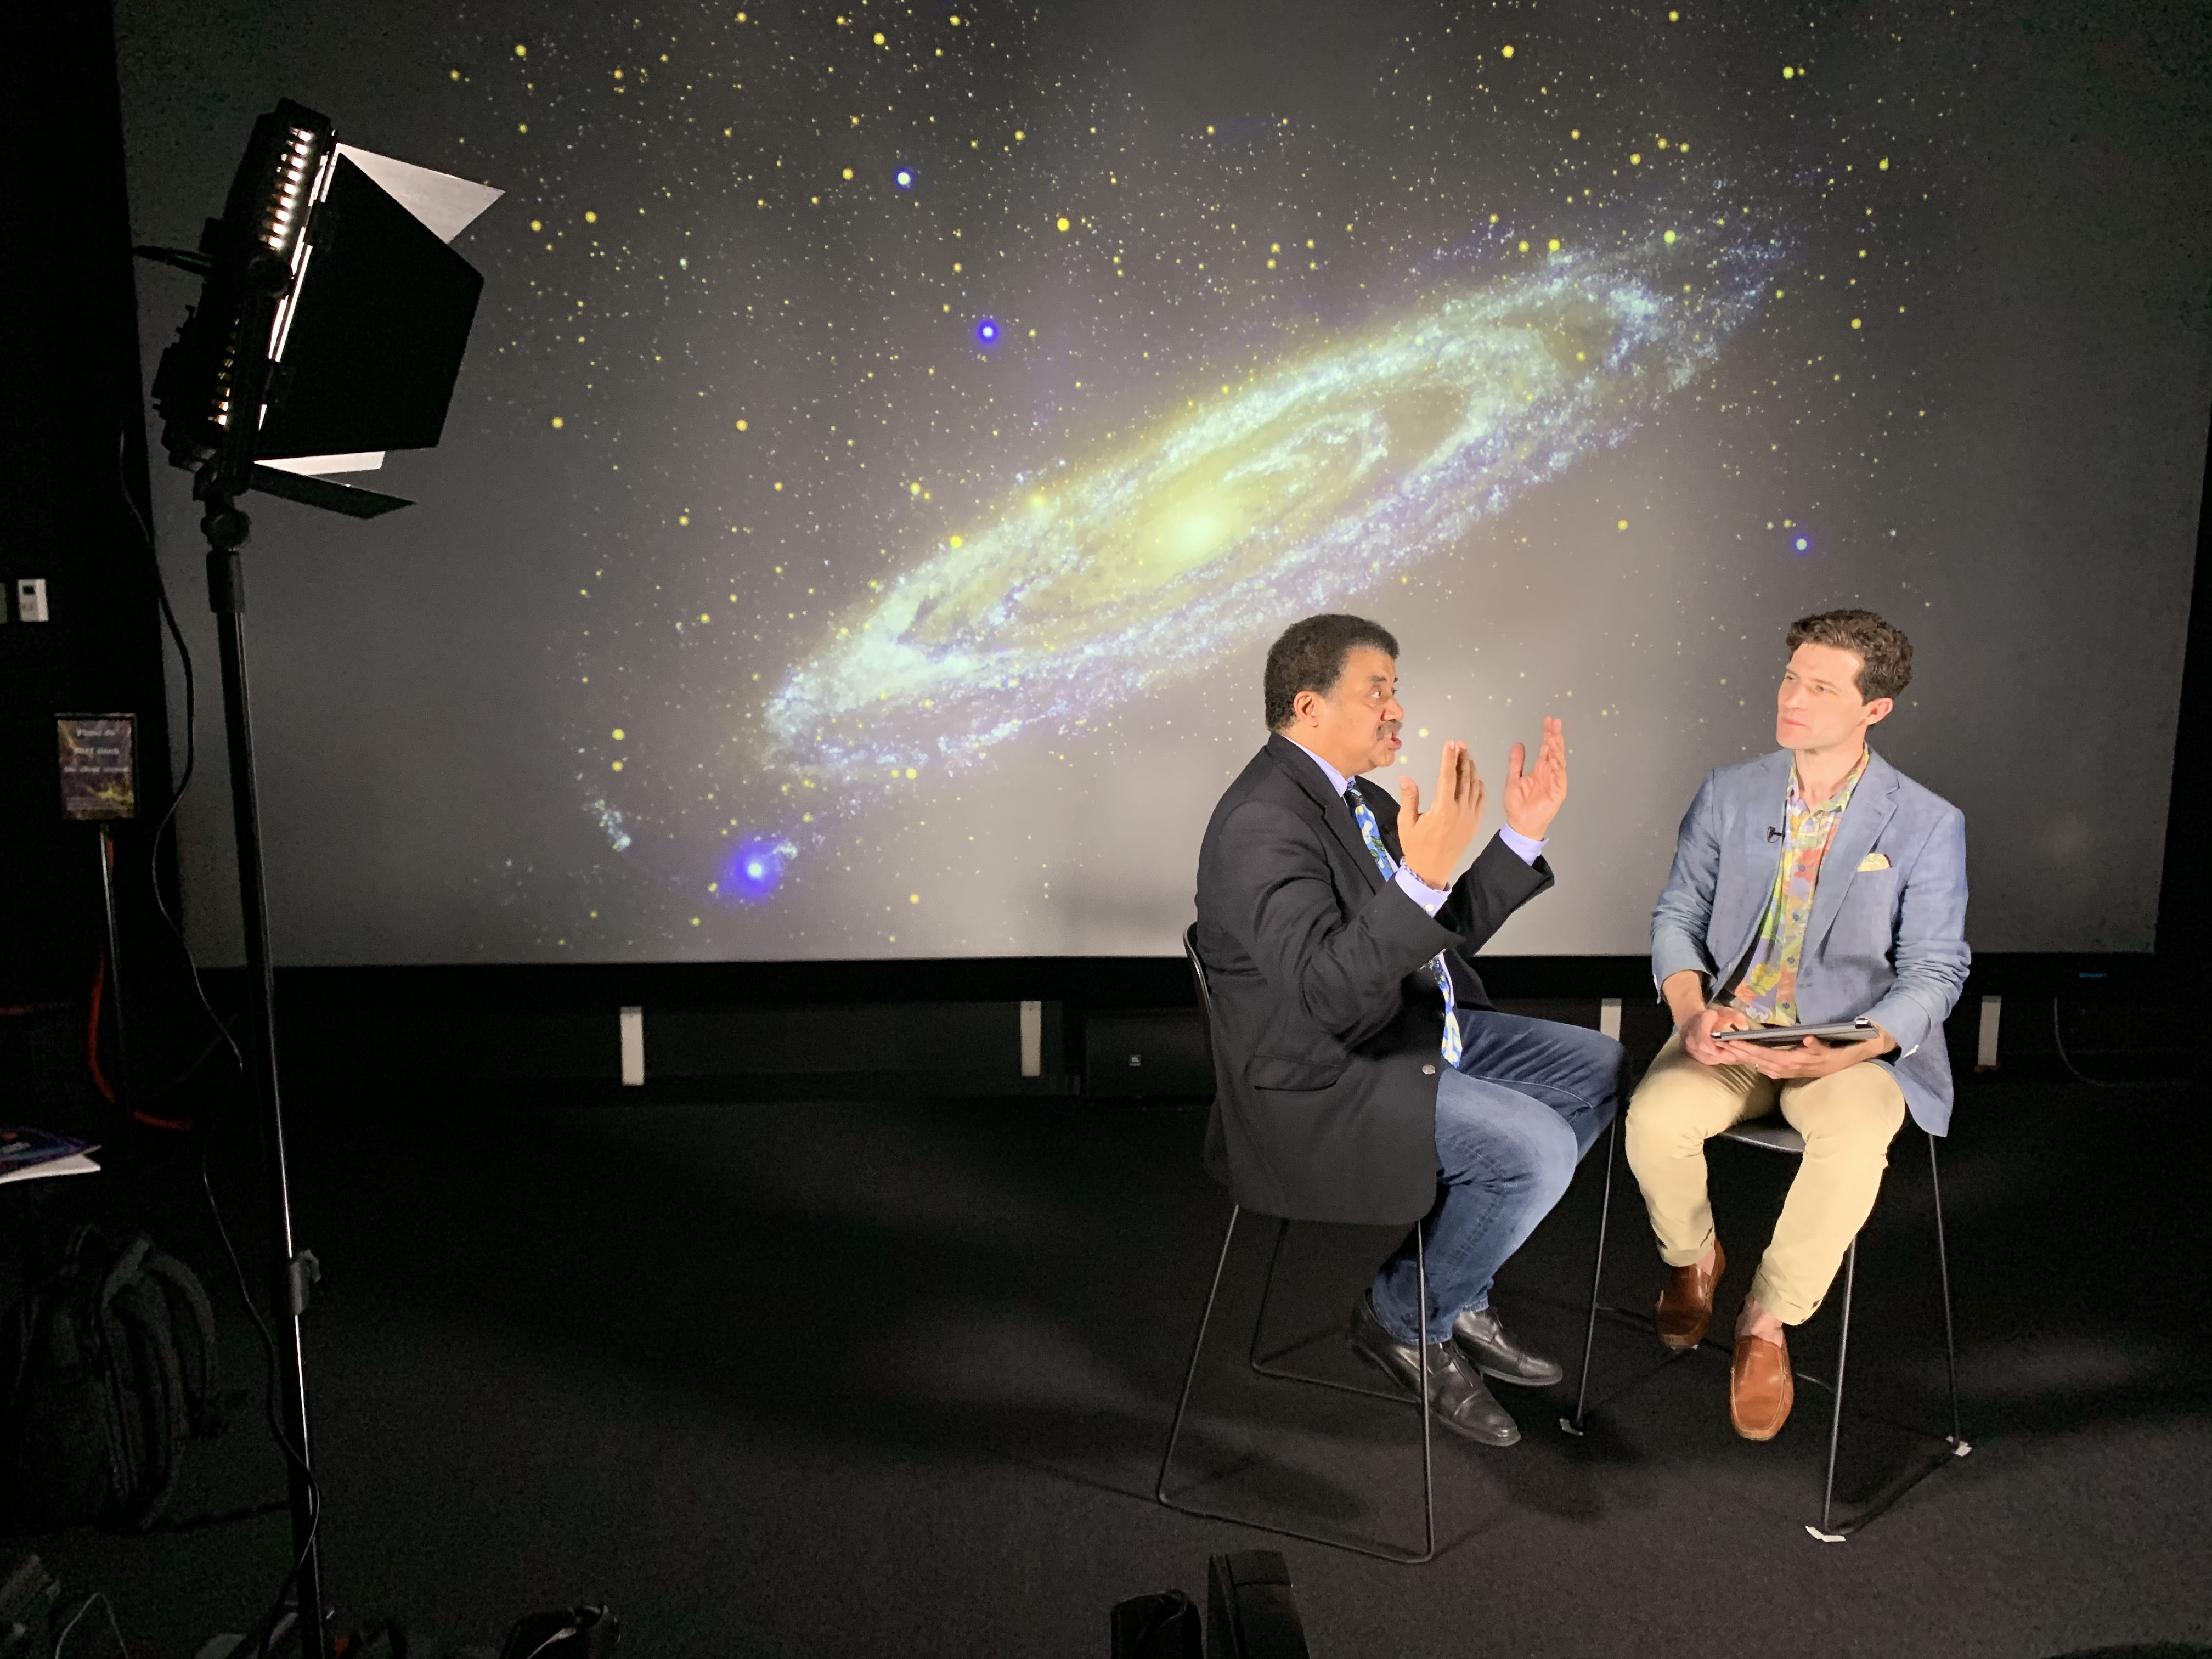 Behind the scenes image of Neil deGrasse Tyson and Prof Alan Duffy